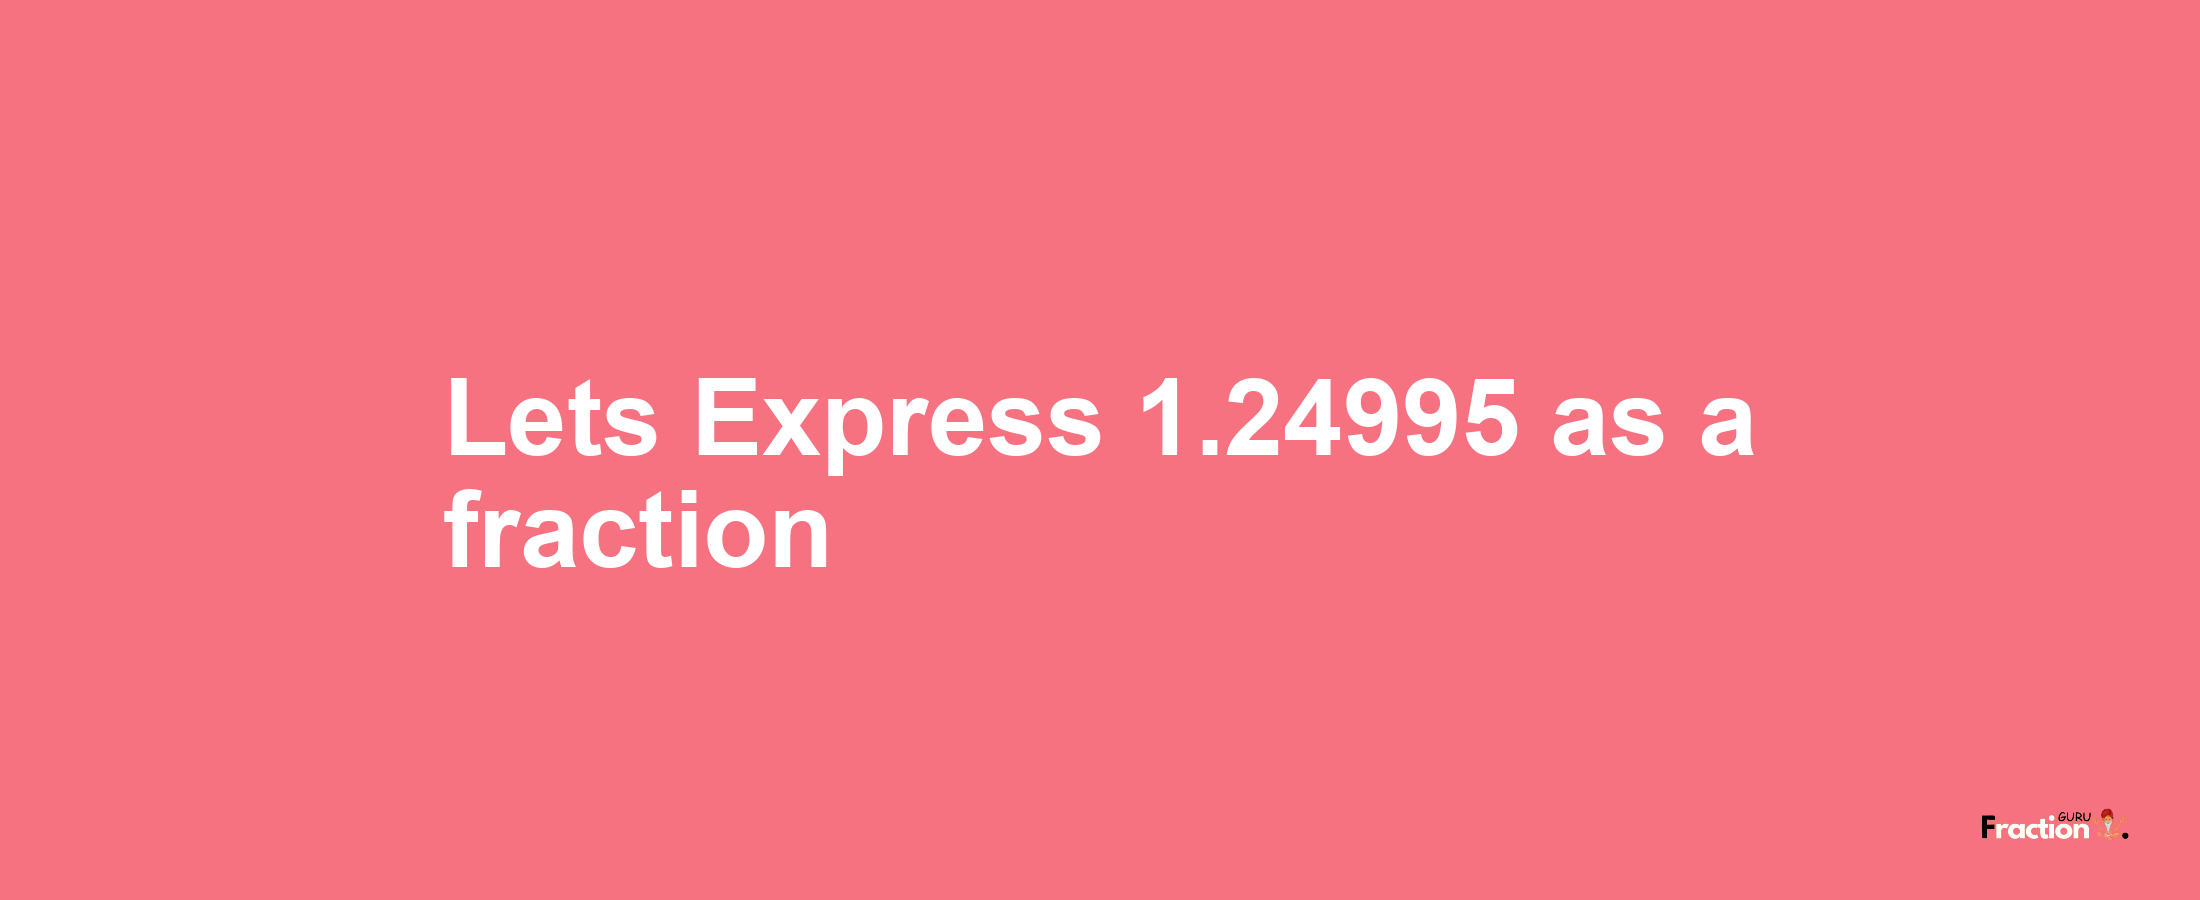 Lets Express 1.24995 as afraction